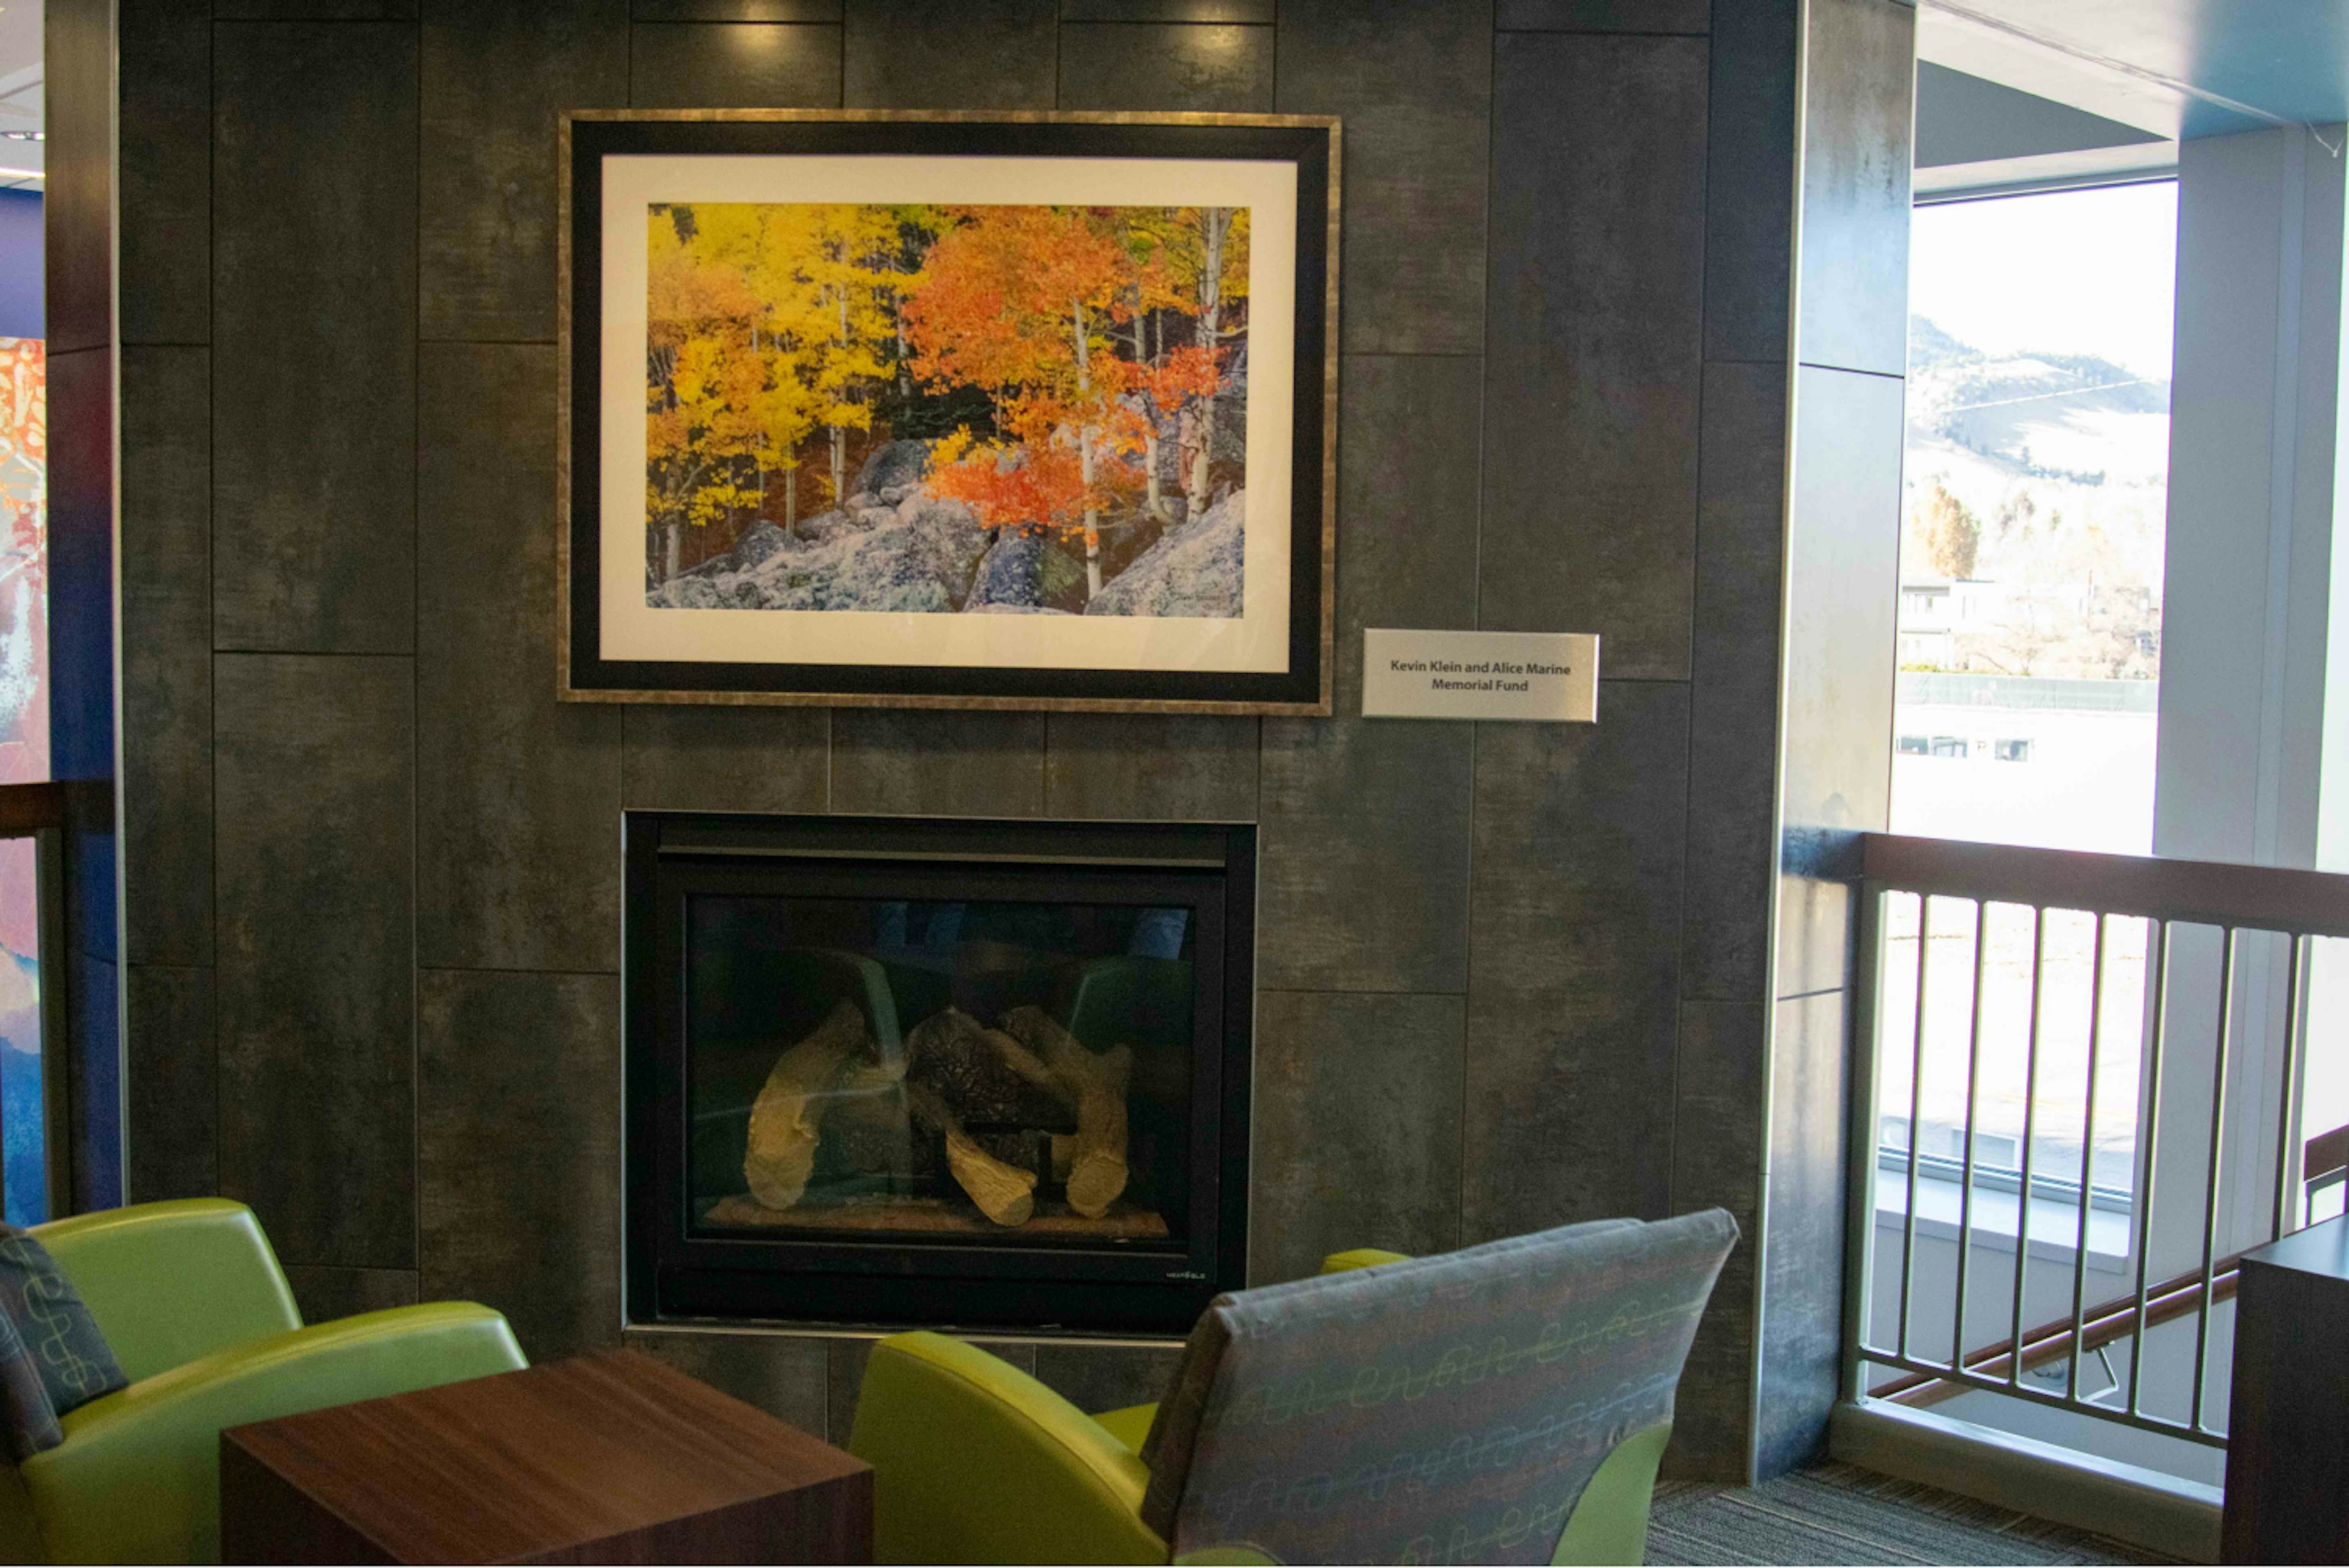 Ryan Wellness Center Upstairs, fireplace with photo of autumn scene. Two green lounge chairs facing fireplace.